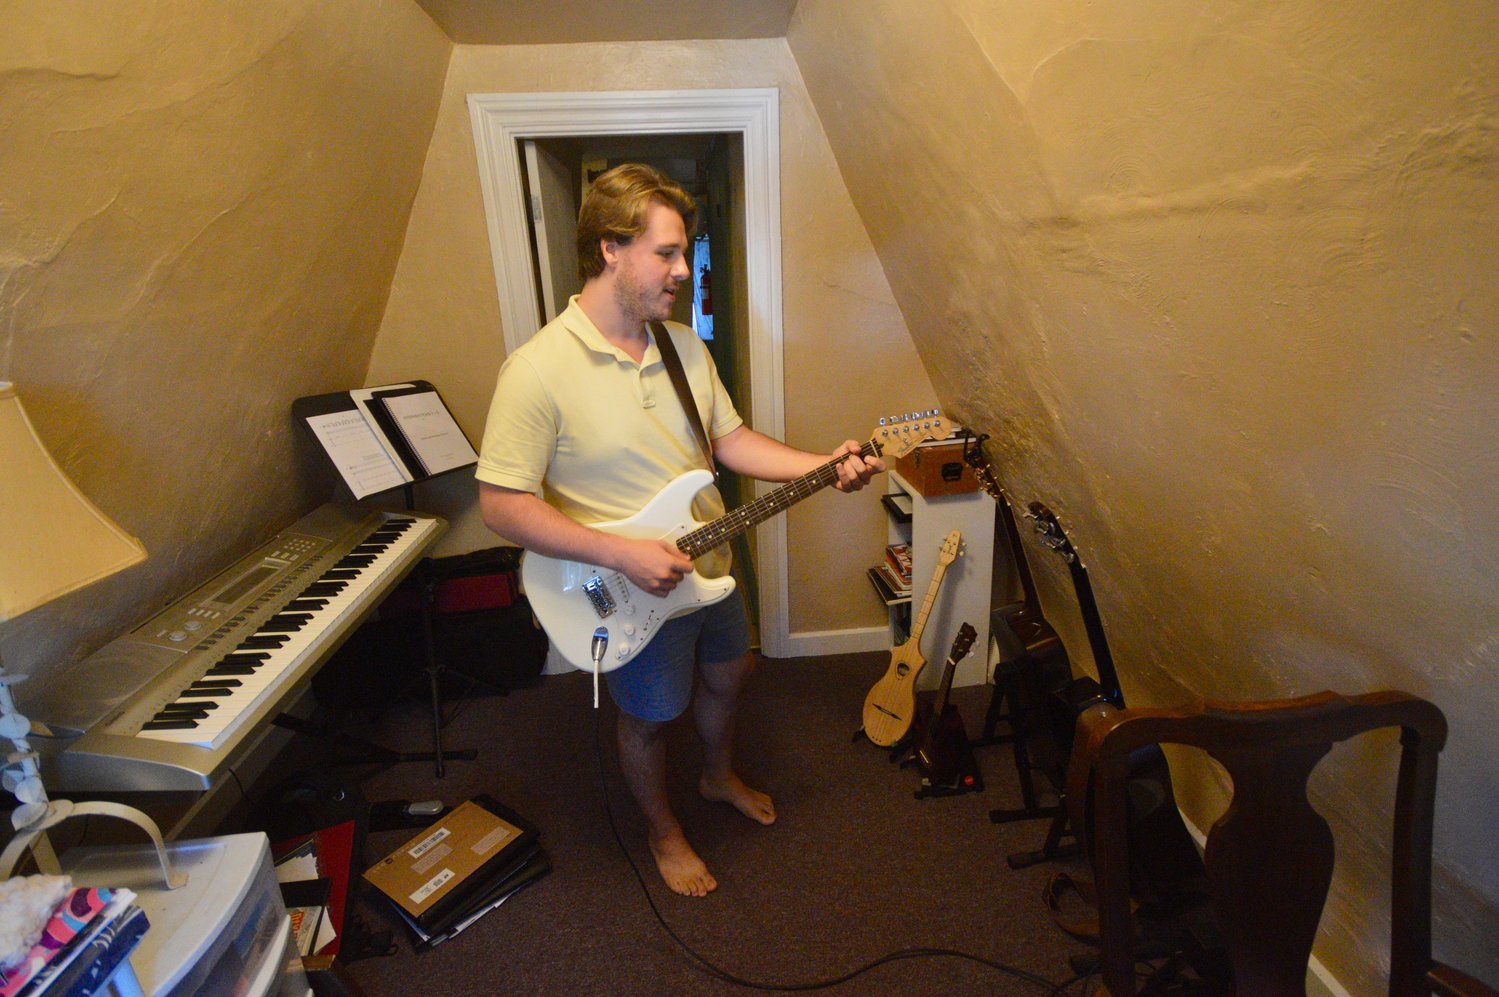 Nicholas Quigley plays electric guitar in his apartment’s tiny music studio that’s crammed with other instruments. He used guitar as a counterpoint to nature sounds he heard during a walk at Gooseberry Island in Massachusetts.